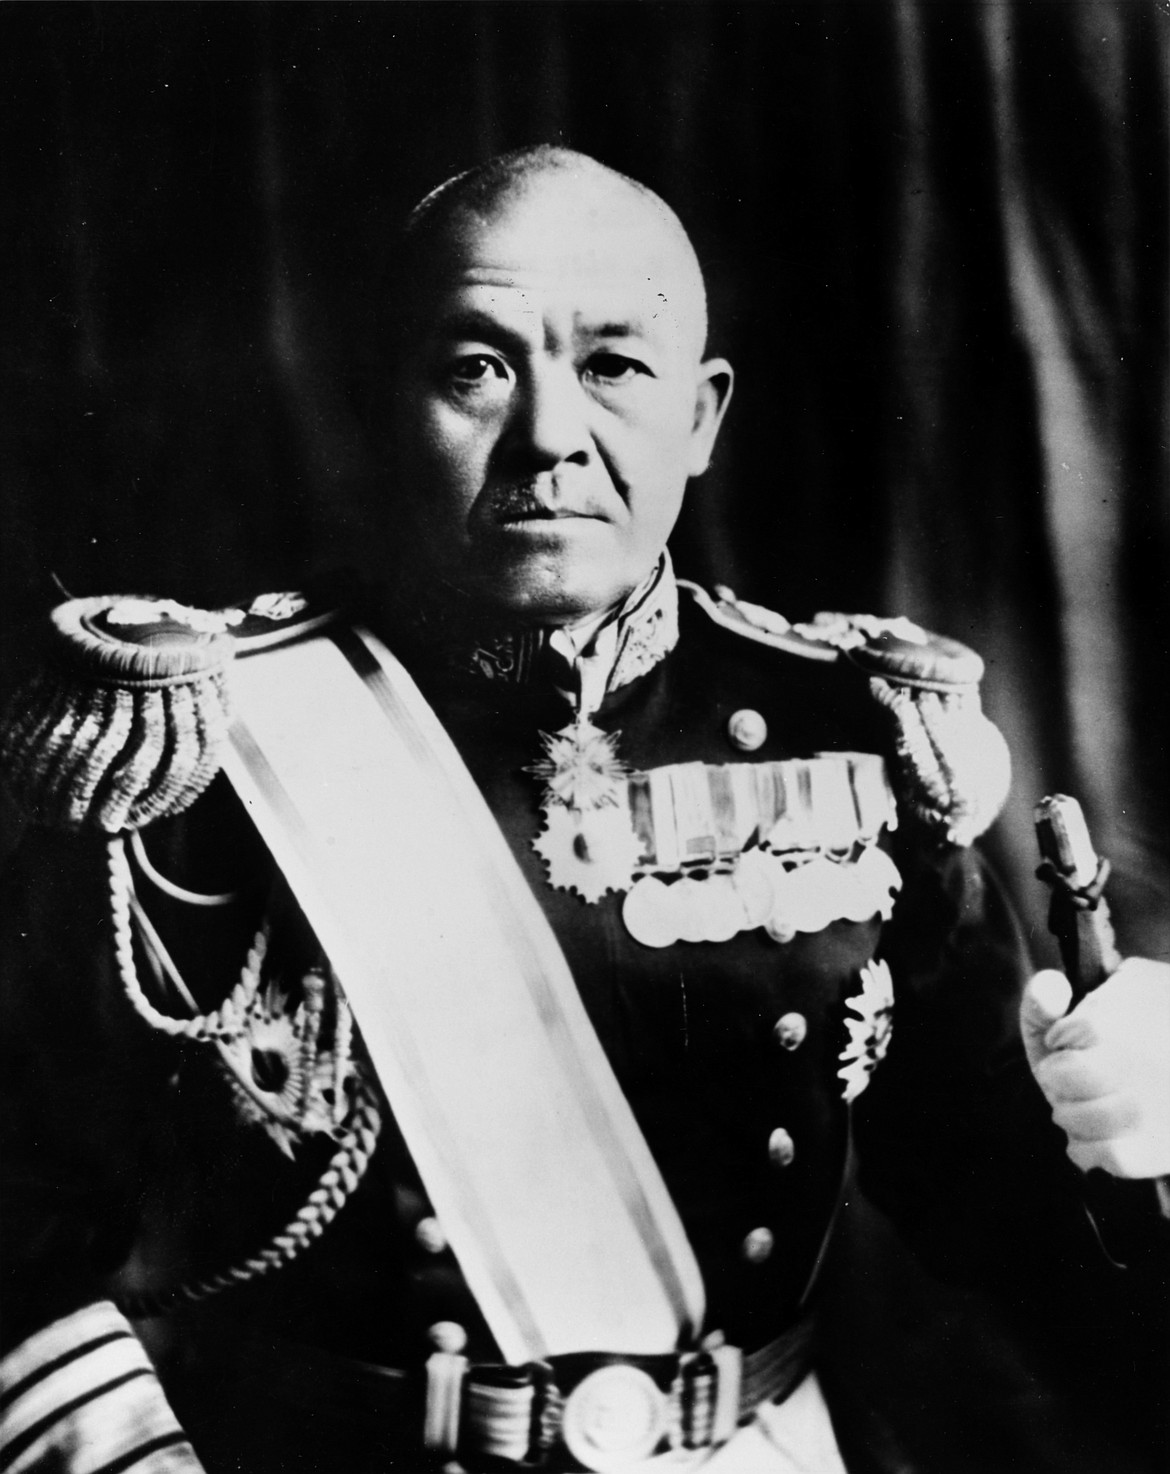 Imperial Japanese Navy Vice Admiral Chuichi Noguma (1887-1944) was one of Japan’s best admirals, commanding attacks on Pearl Harbor and Midway, was later demoted and took his own life at the Battle of Saipan, rather than face another Japanese defeat.